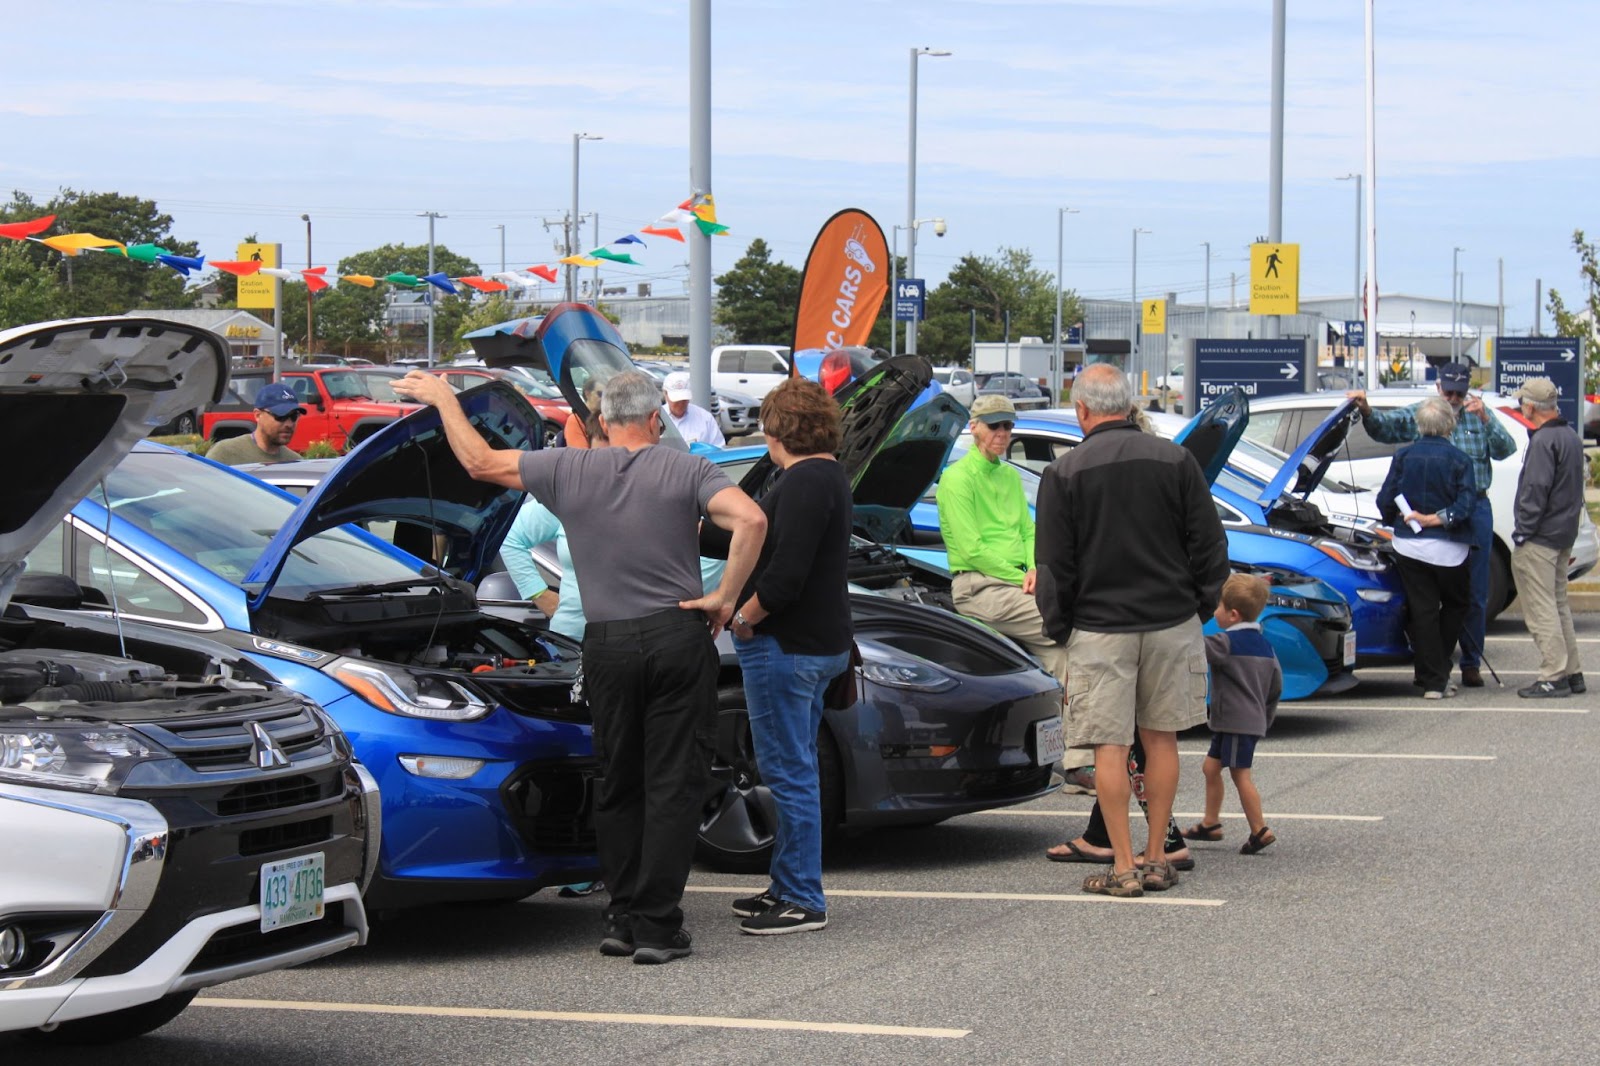 A line of electric vehicles with their hoods open, and various people looking at the vehicles and speaking with each other